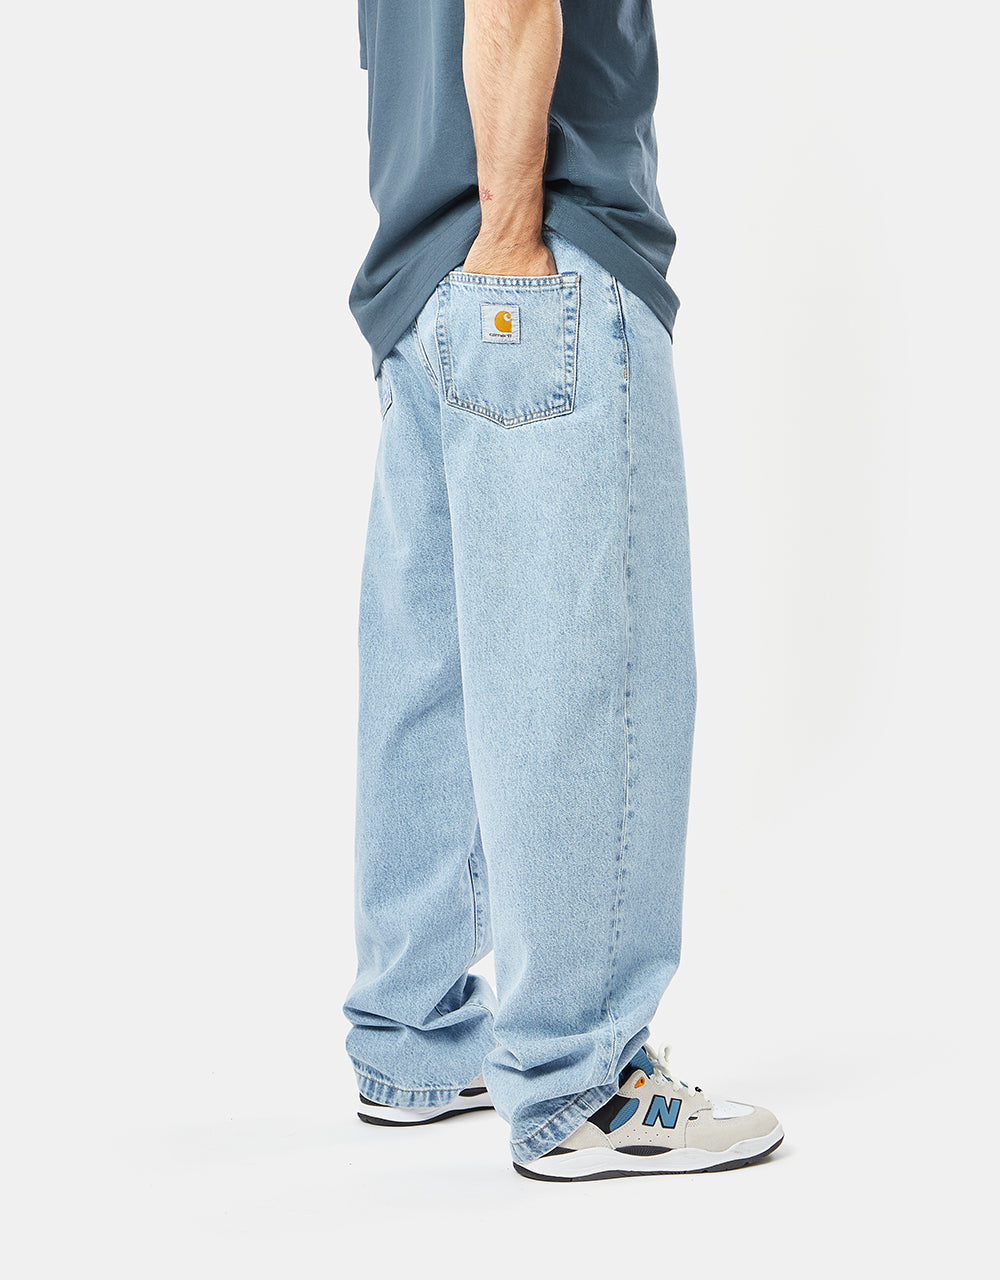 Carhartt WIP Landon Pant - Blue (Bleached) – Route One